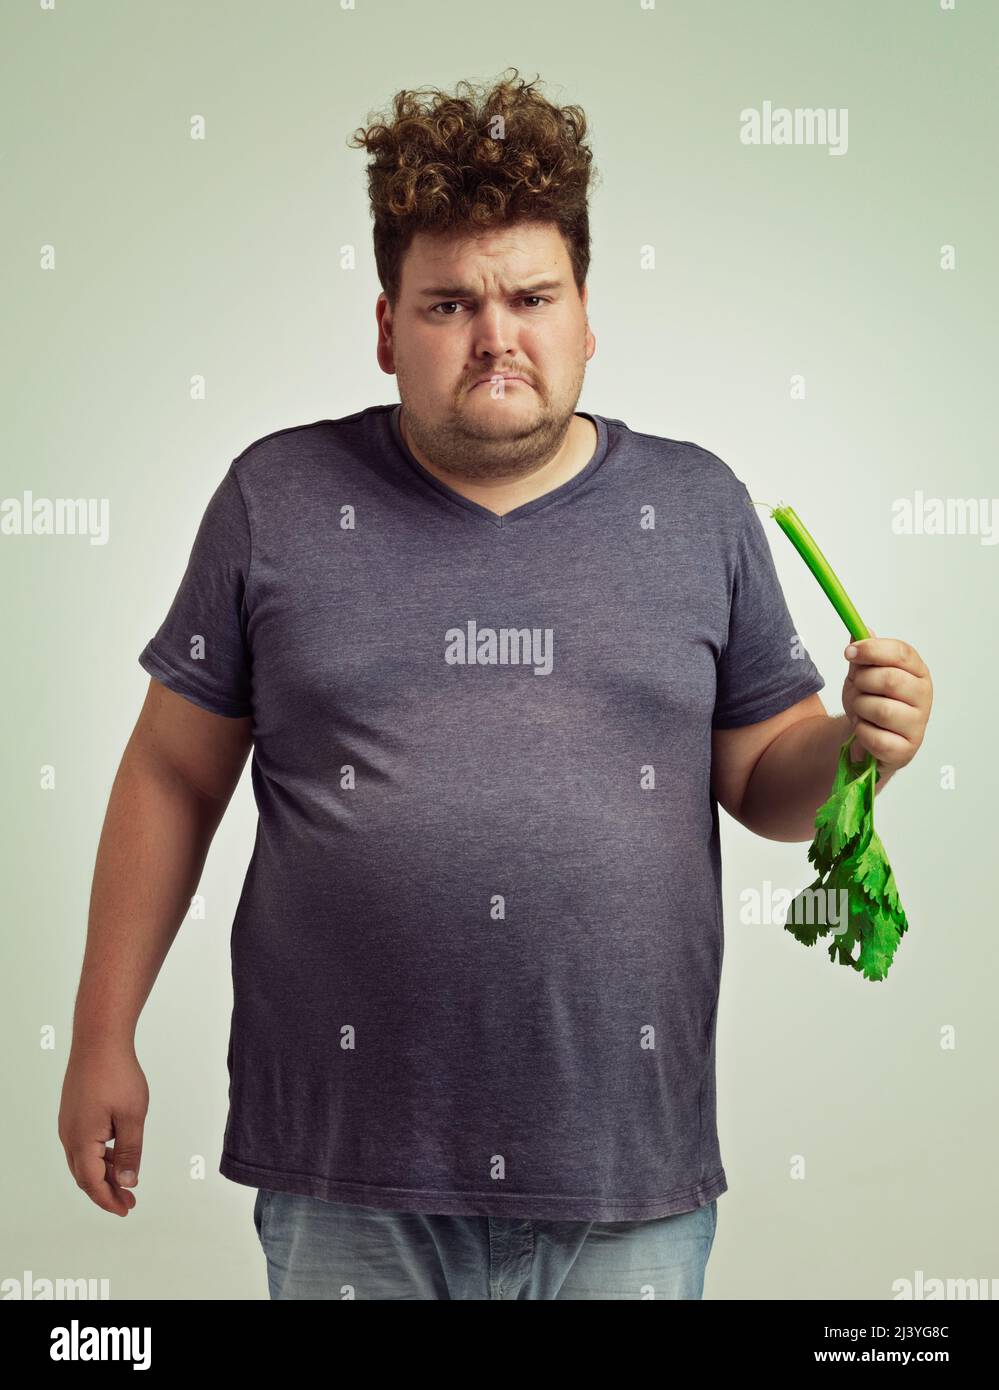 Nope, dont want it. Shot of an unhappy overweight man holding a celery stick. Stock Photo